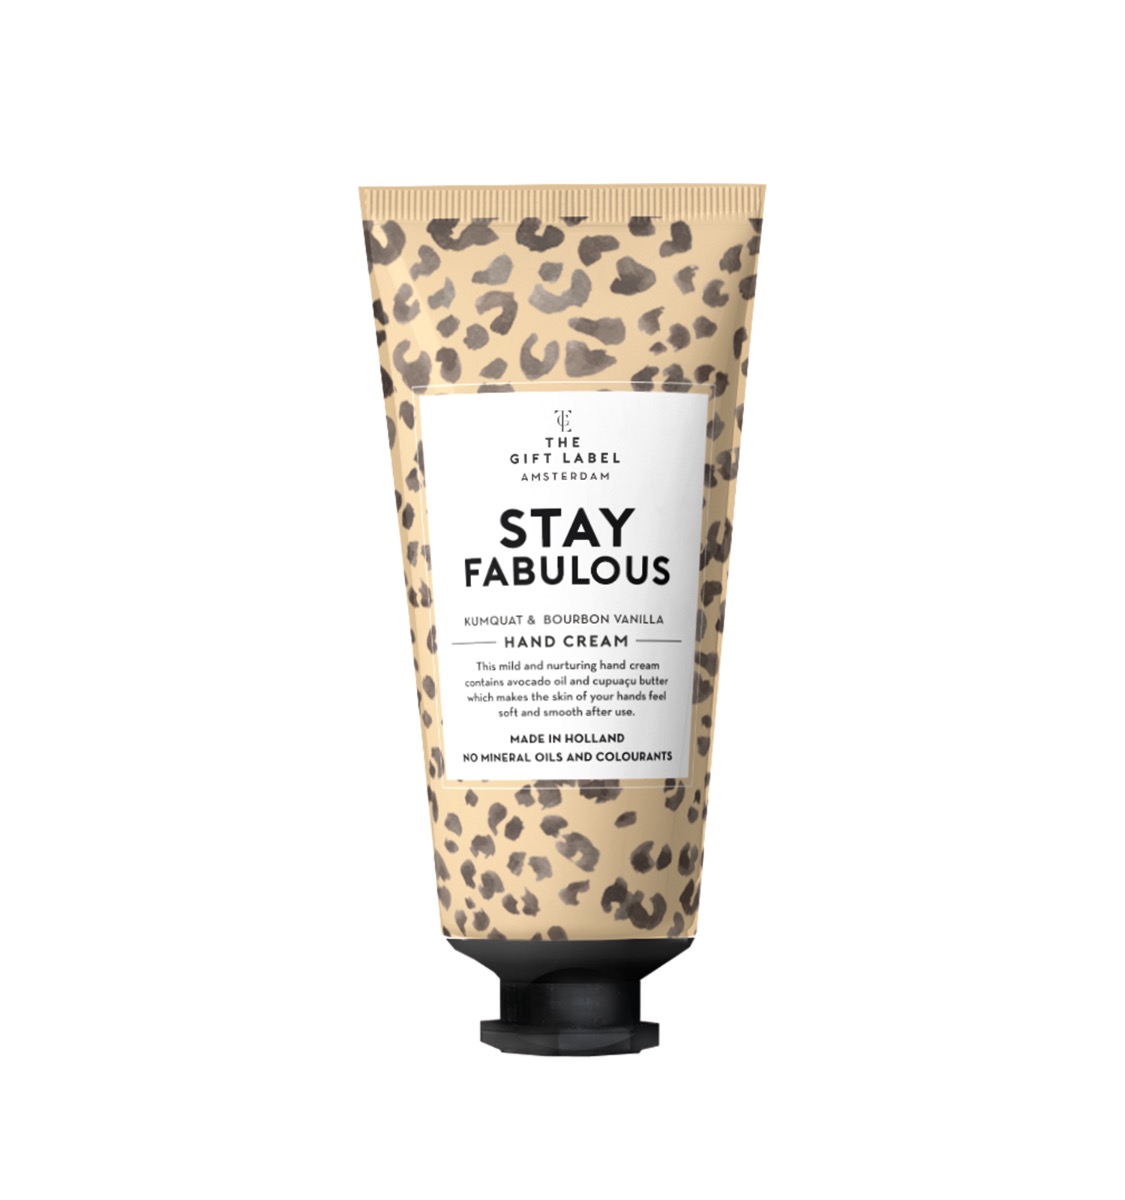 'Stay Fabulous' hand cream 40ml - The Gift Label 